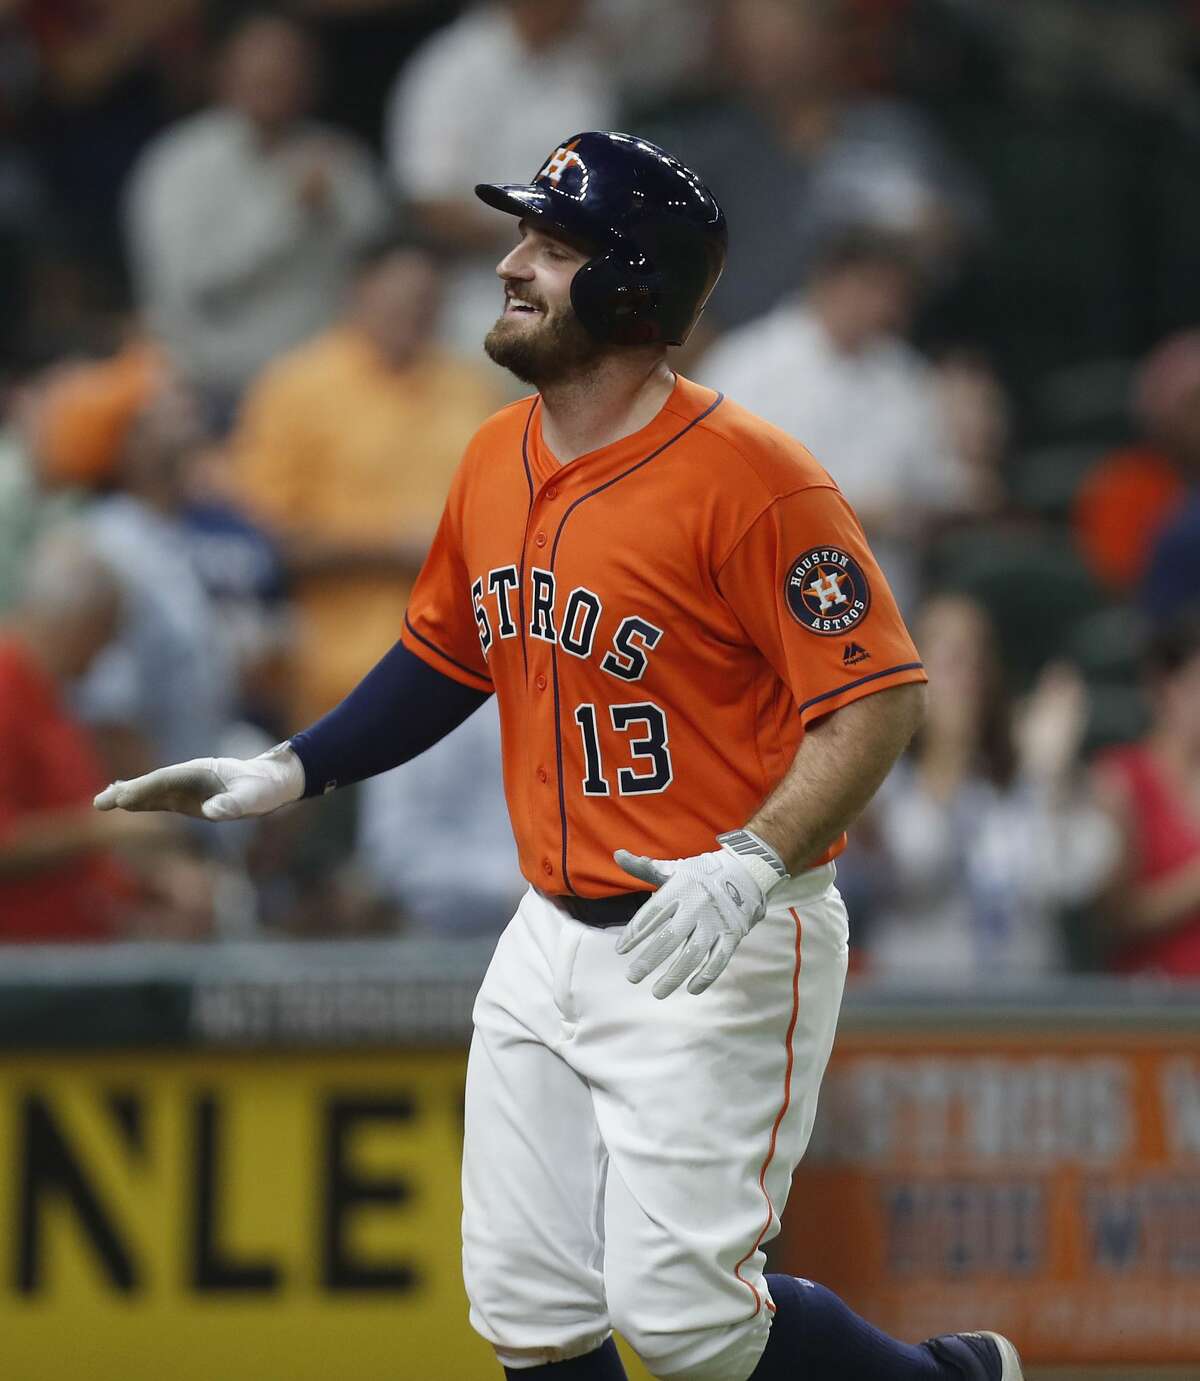 Houston Astros Tyler White (13) smiles as he crosses home plate after hitting his second home run of the night during the eighth inning of an MLB game at Minute Maid Park, Friday, Aug. 4, 2017, in Houston. ( Karen Warren / Houston Chronicle )